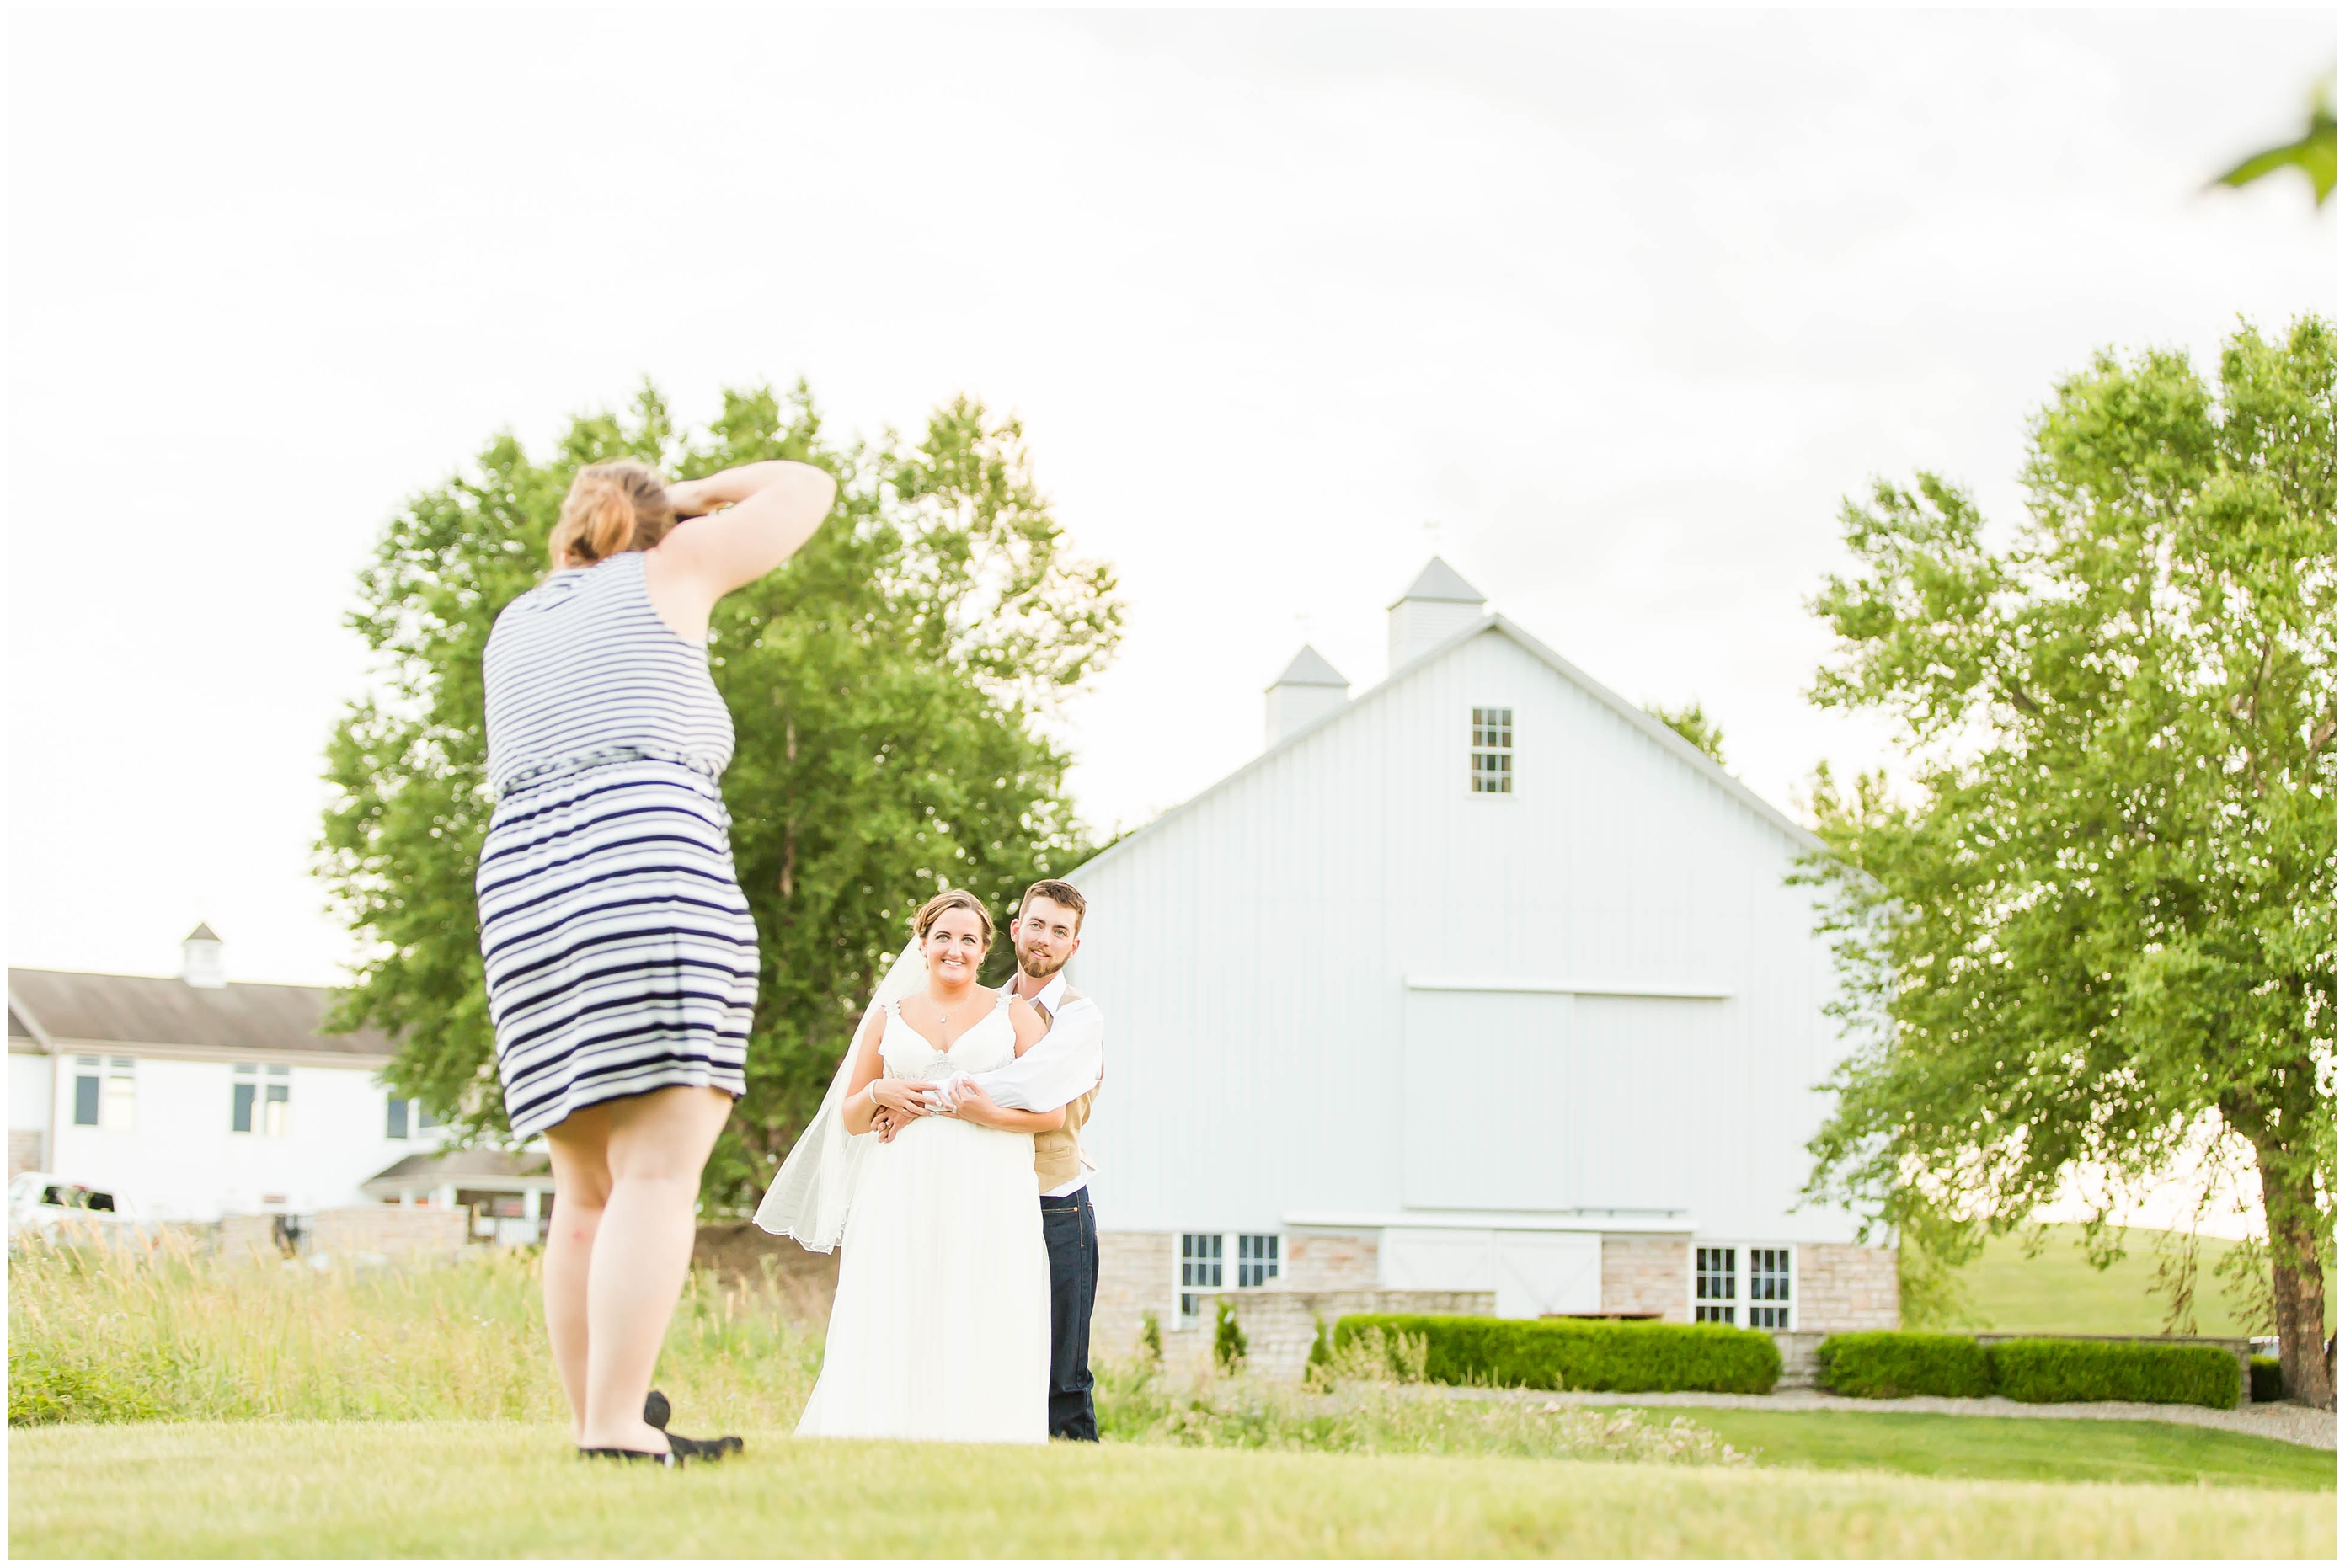 Cleveland Wedding Photographer,classic tractor with bride and groom,loren jackson photography,photographer akron ohio,wheat field wedding photos,